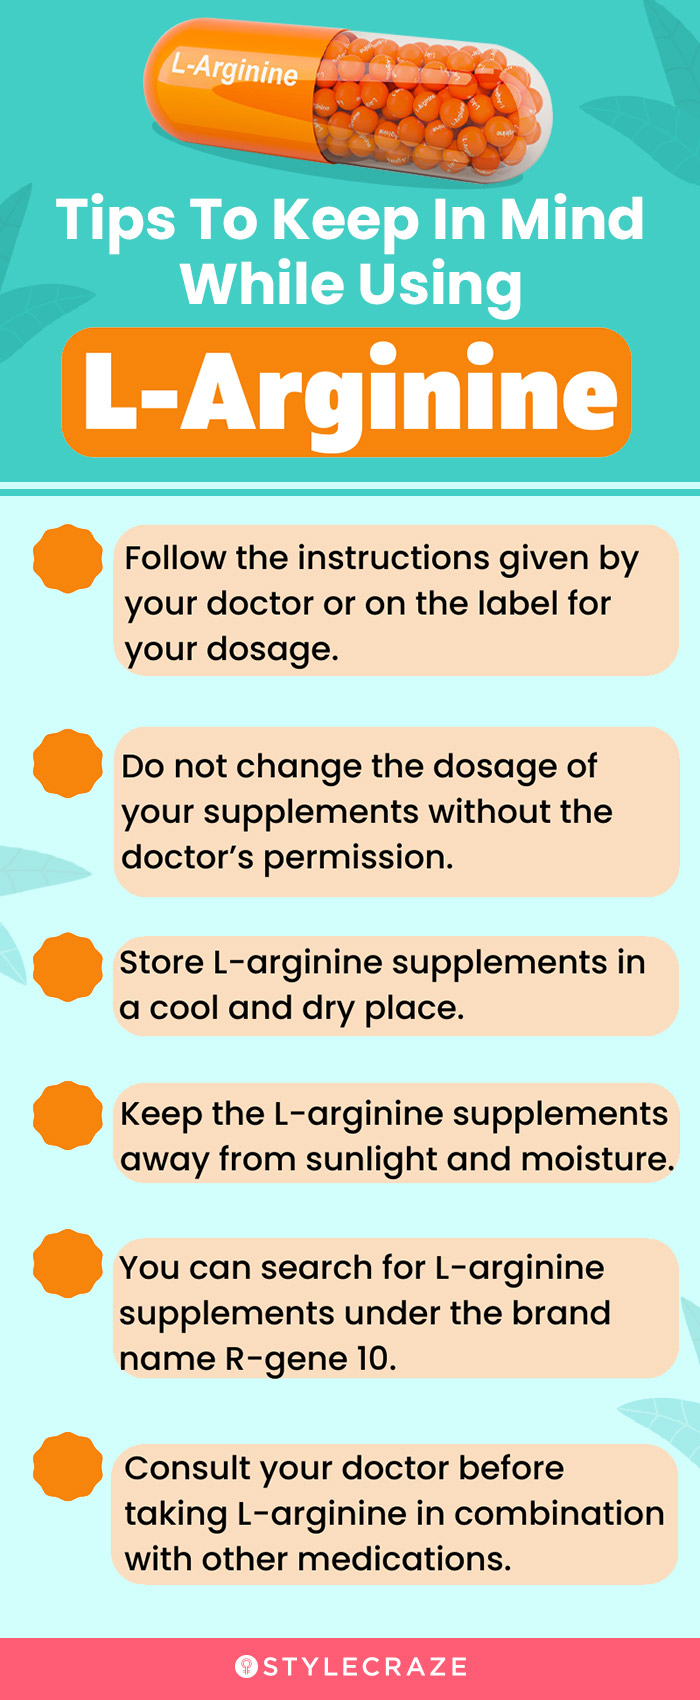 tips to keep in mind while using l-arginine [infographic]